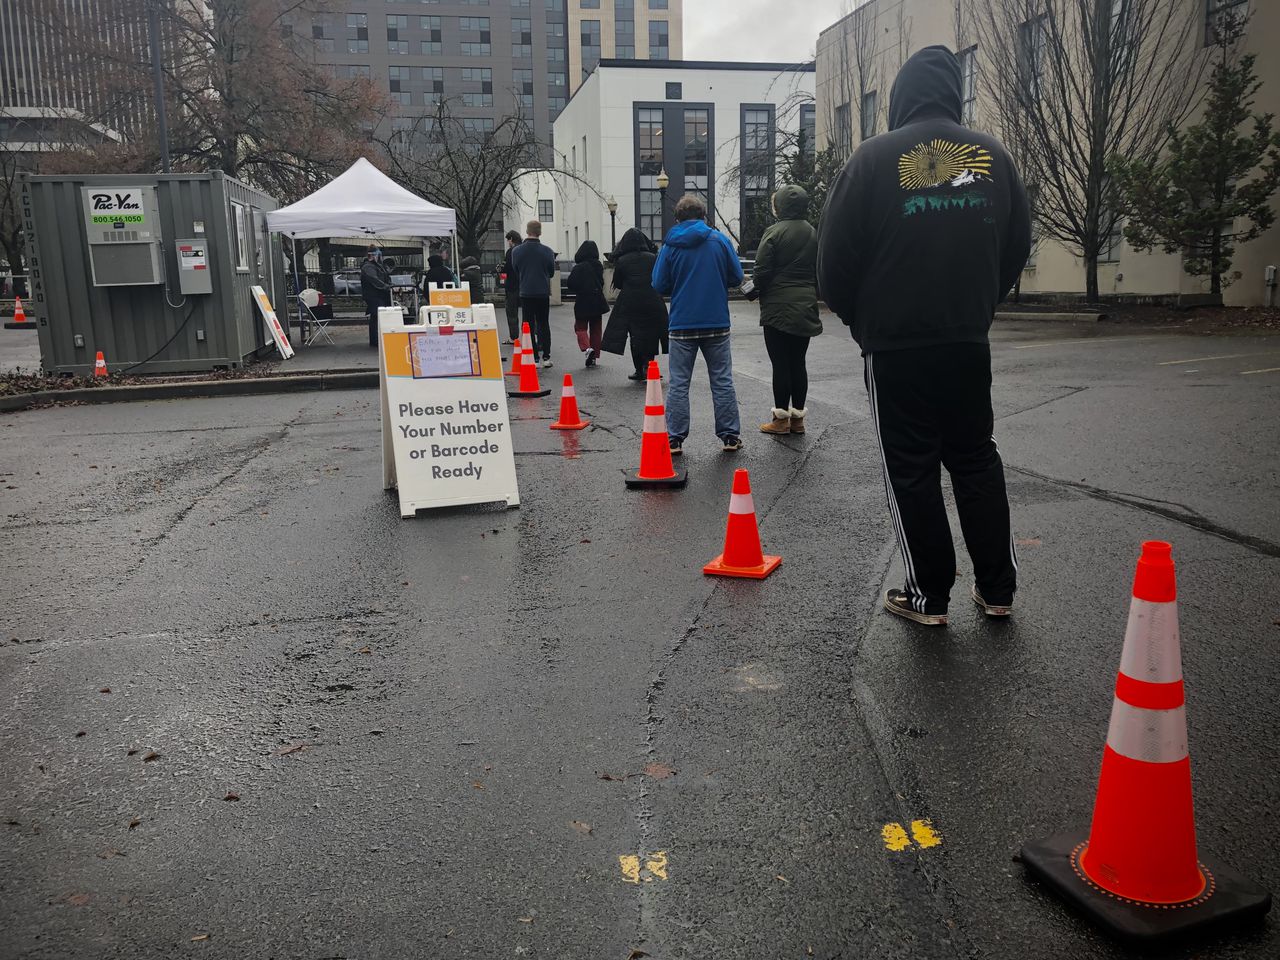 A line of people stand in a parking lot waiting to get tested for COVID-19. There are orange traffic cones lining up next to them and a white tent under which people are getting tested.